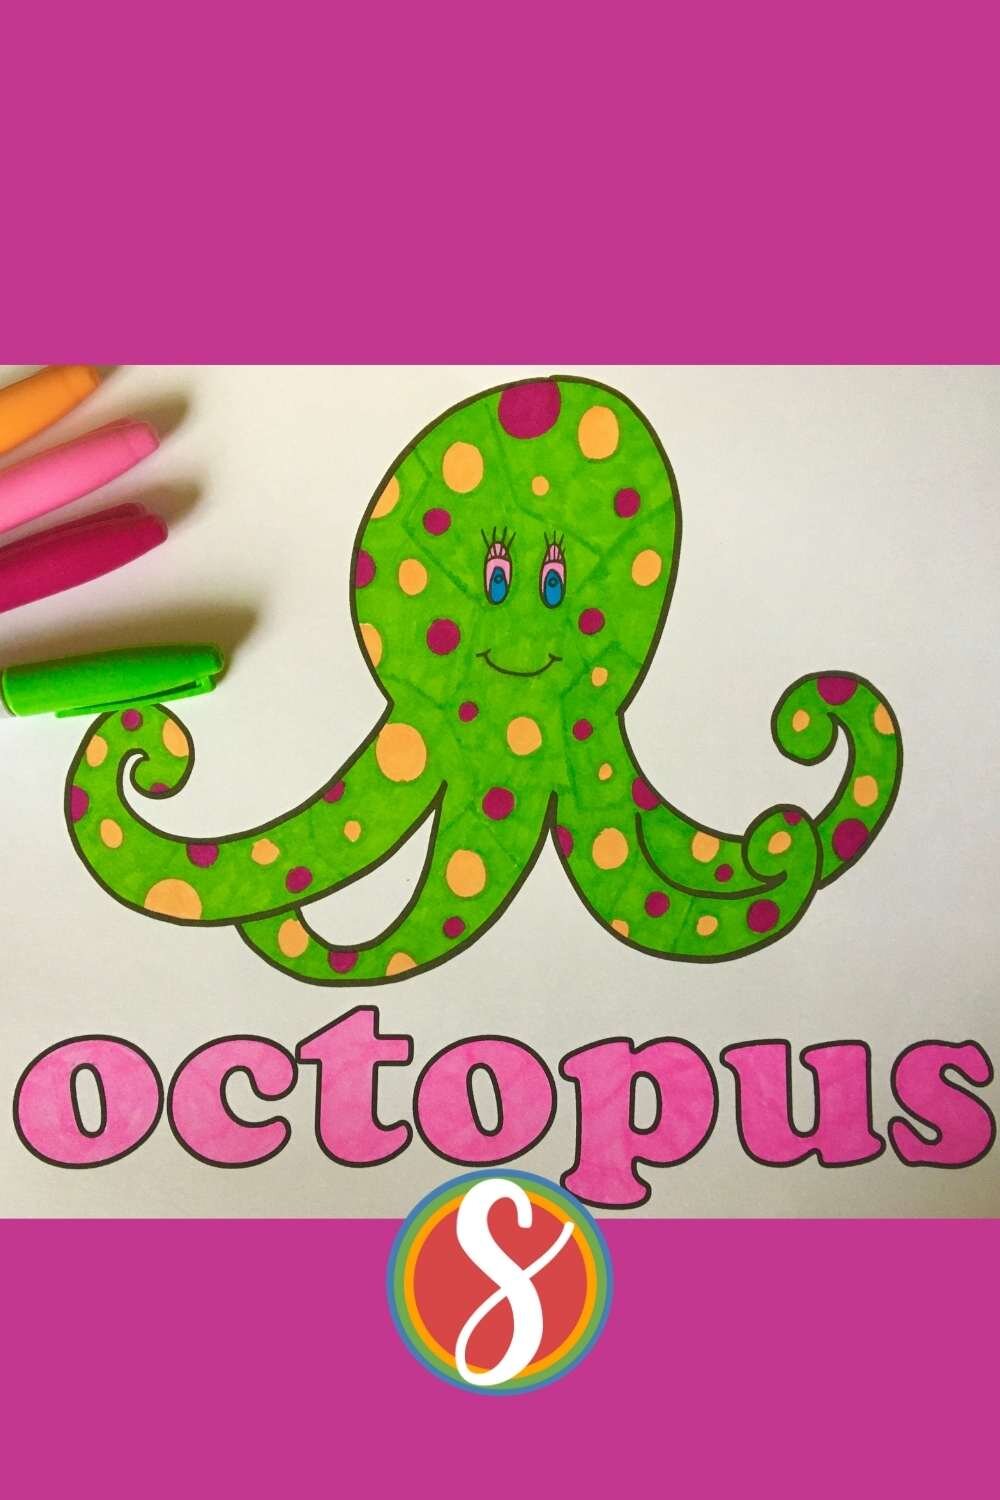 Free Octopus coloring page! 150+ free coloring pages for kids at Stevie Doodles